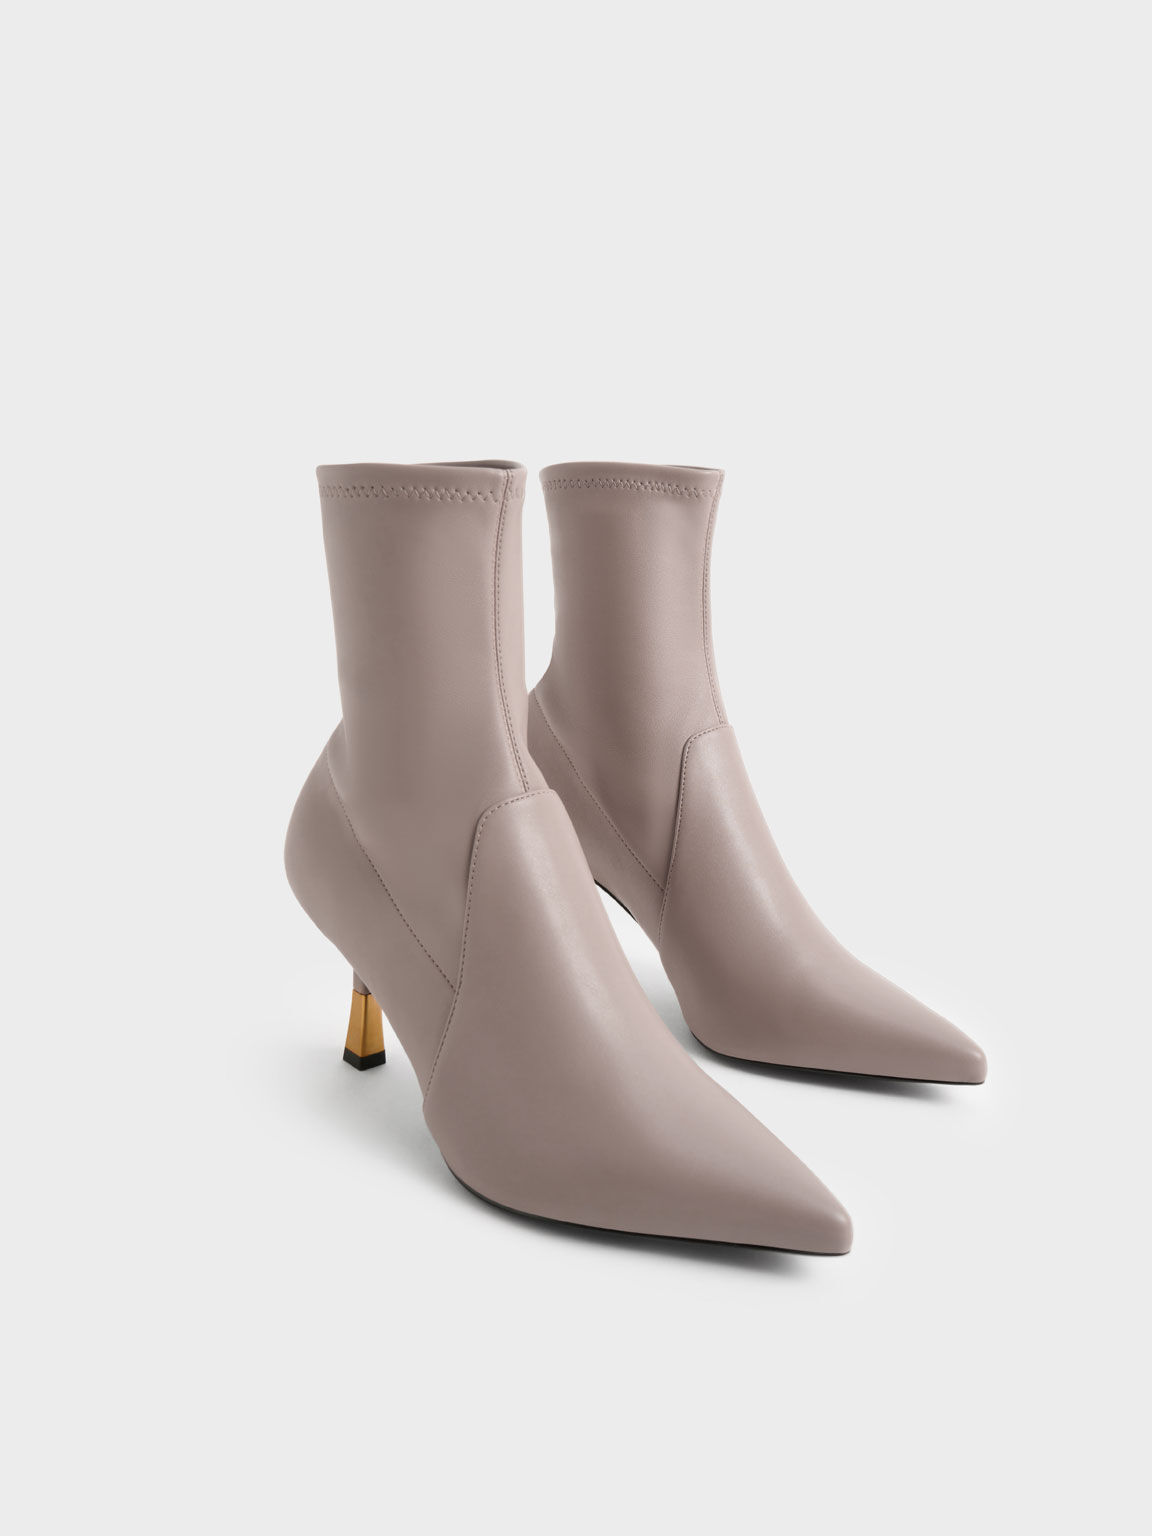 Kitten Heel Ankle Boots, Taupe, hi-res